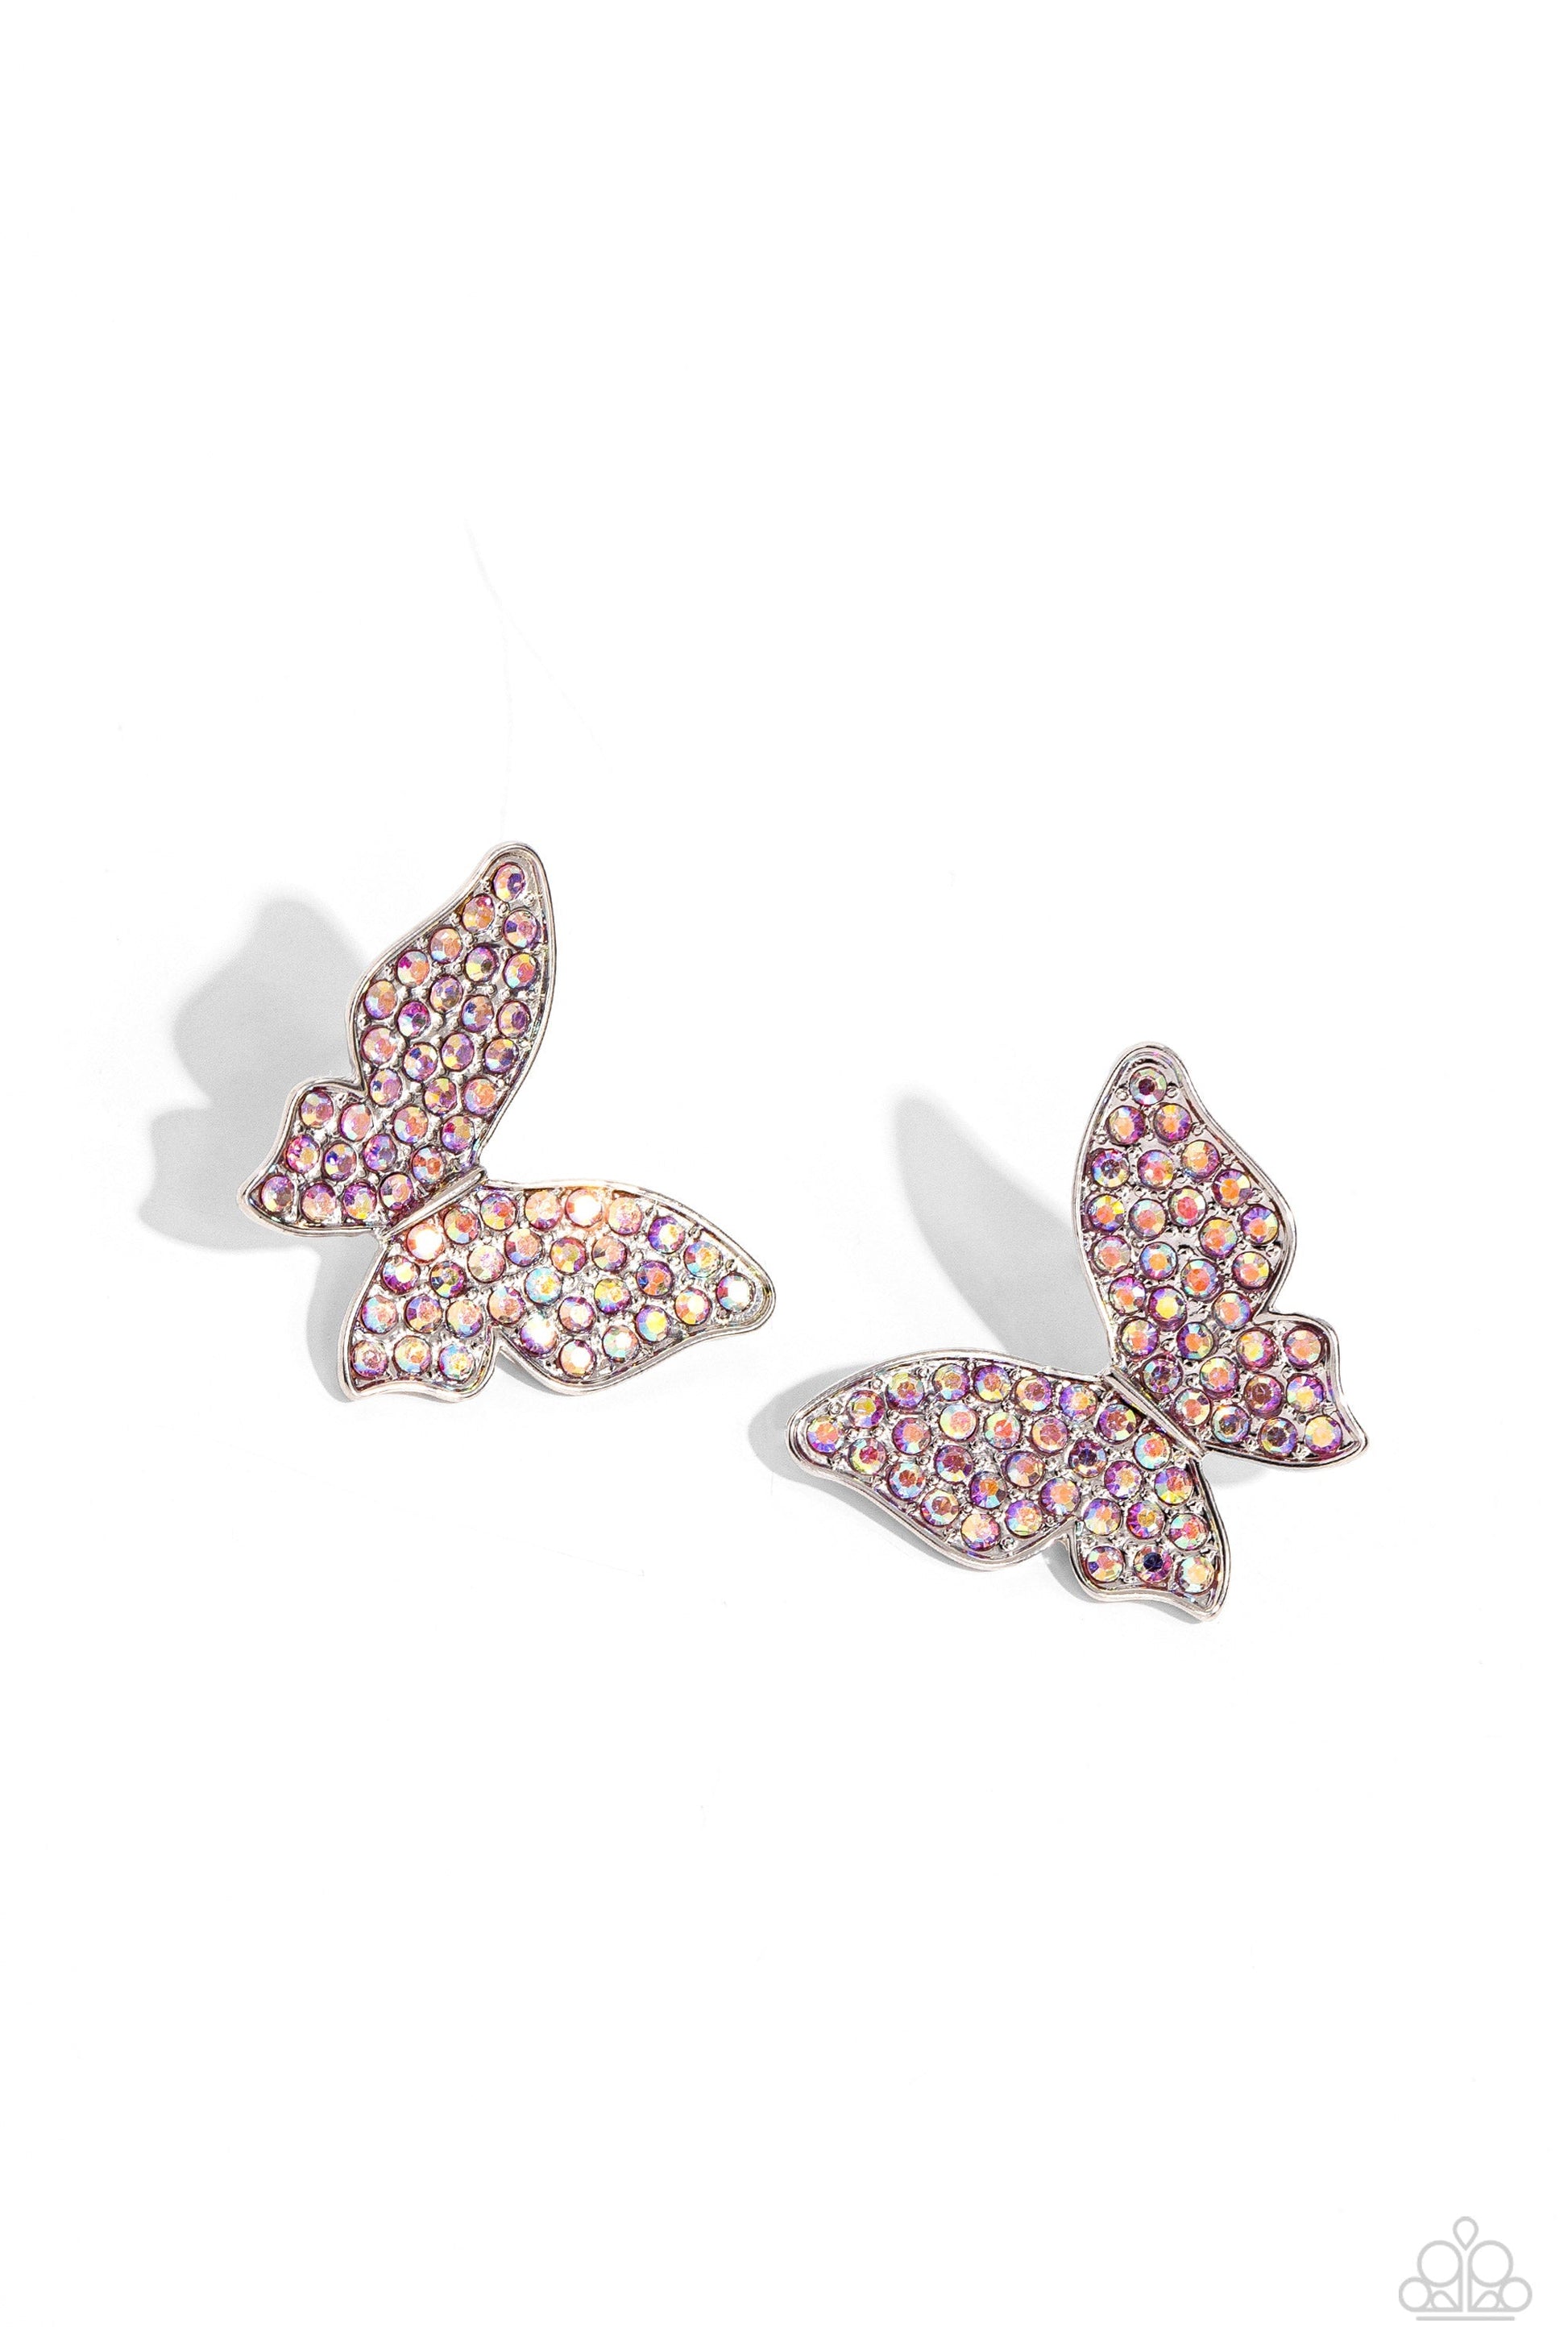 High Life - Pink Butterfly Earrings - Paparazzi Accessories - Featuring a tilted motif, a silver butterfly encrusted with an explosion of pink iridescent rhinestones sparkles at the ear for an enchanting fashion. Earring attaches to a standard post fitting. Due to its prismatic palette, color may vary. Sold as one pair of post earrings.